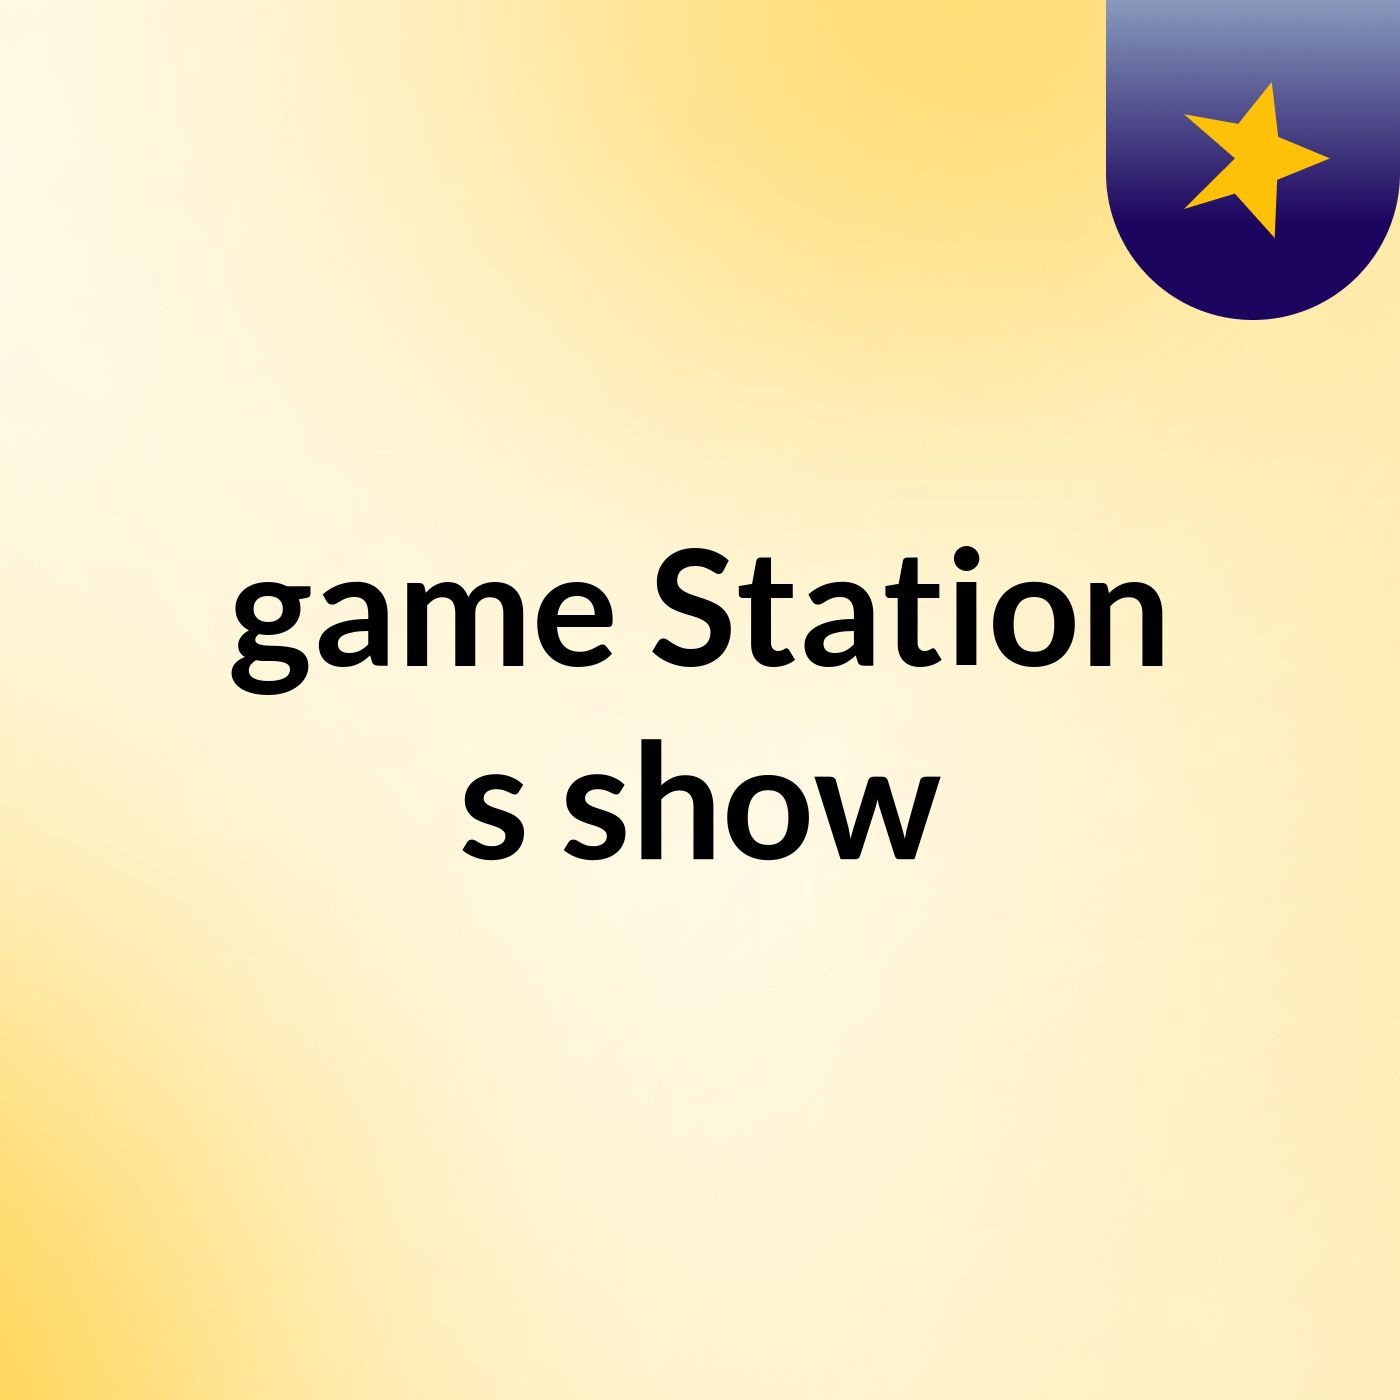 game Station's show